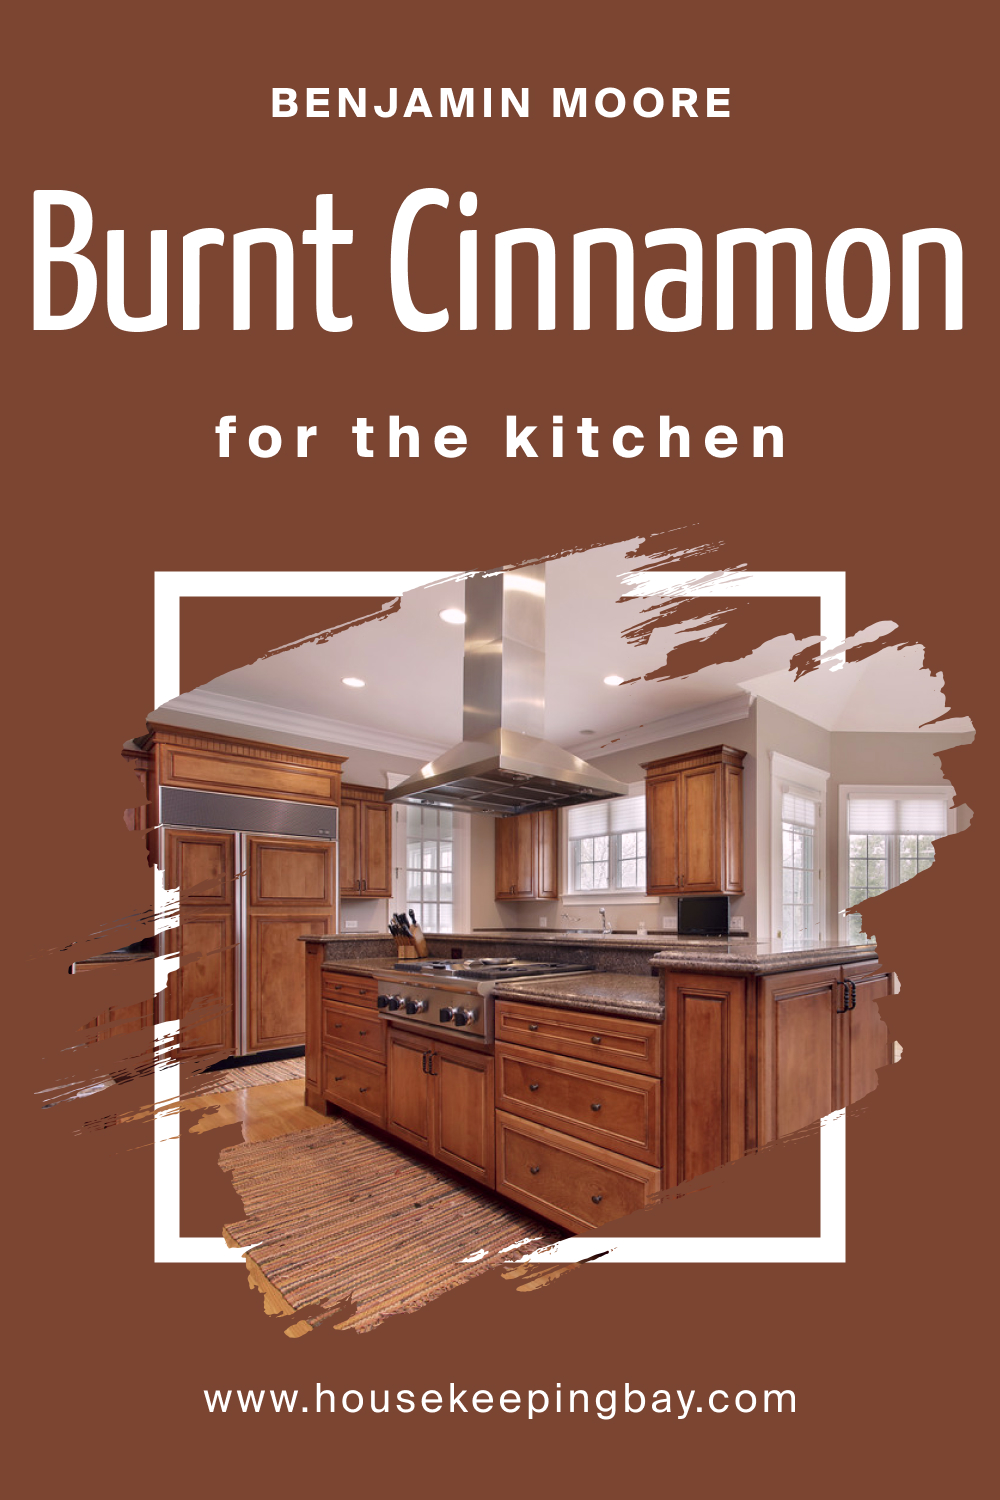 How to Use BM Burnt Cinnamon 2094-10 in the Kitchen?